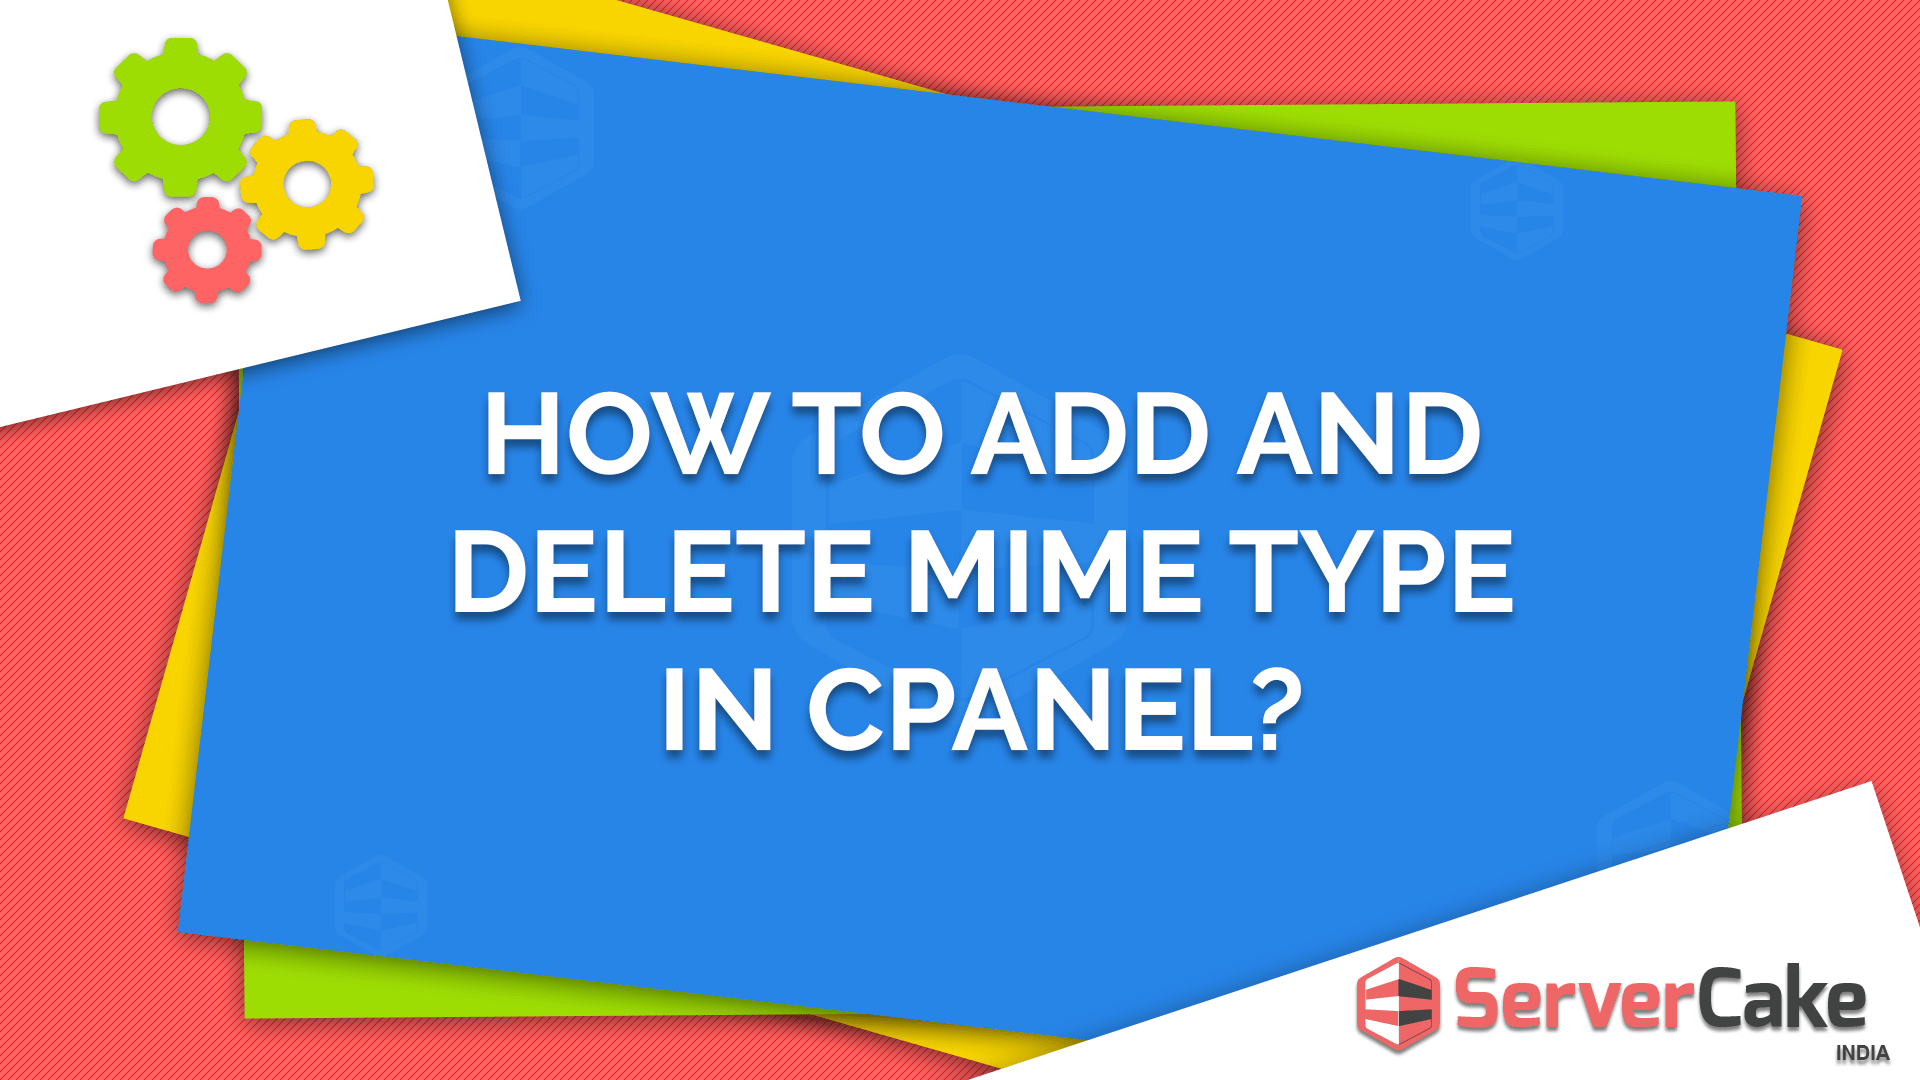 How to Add and Delete a New MIME Type in cPanel